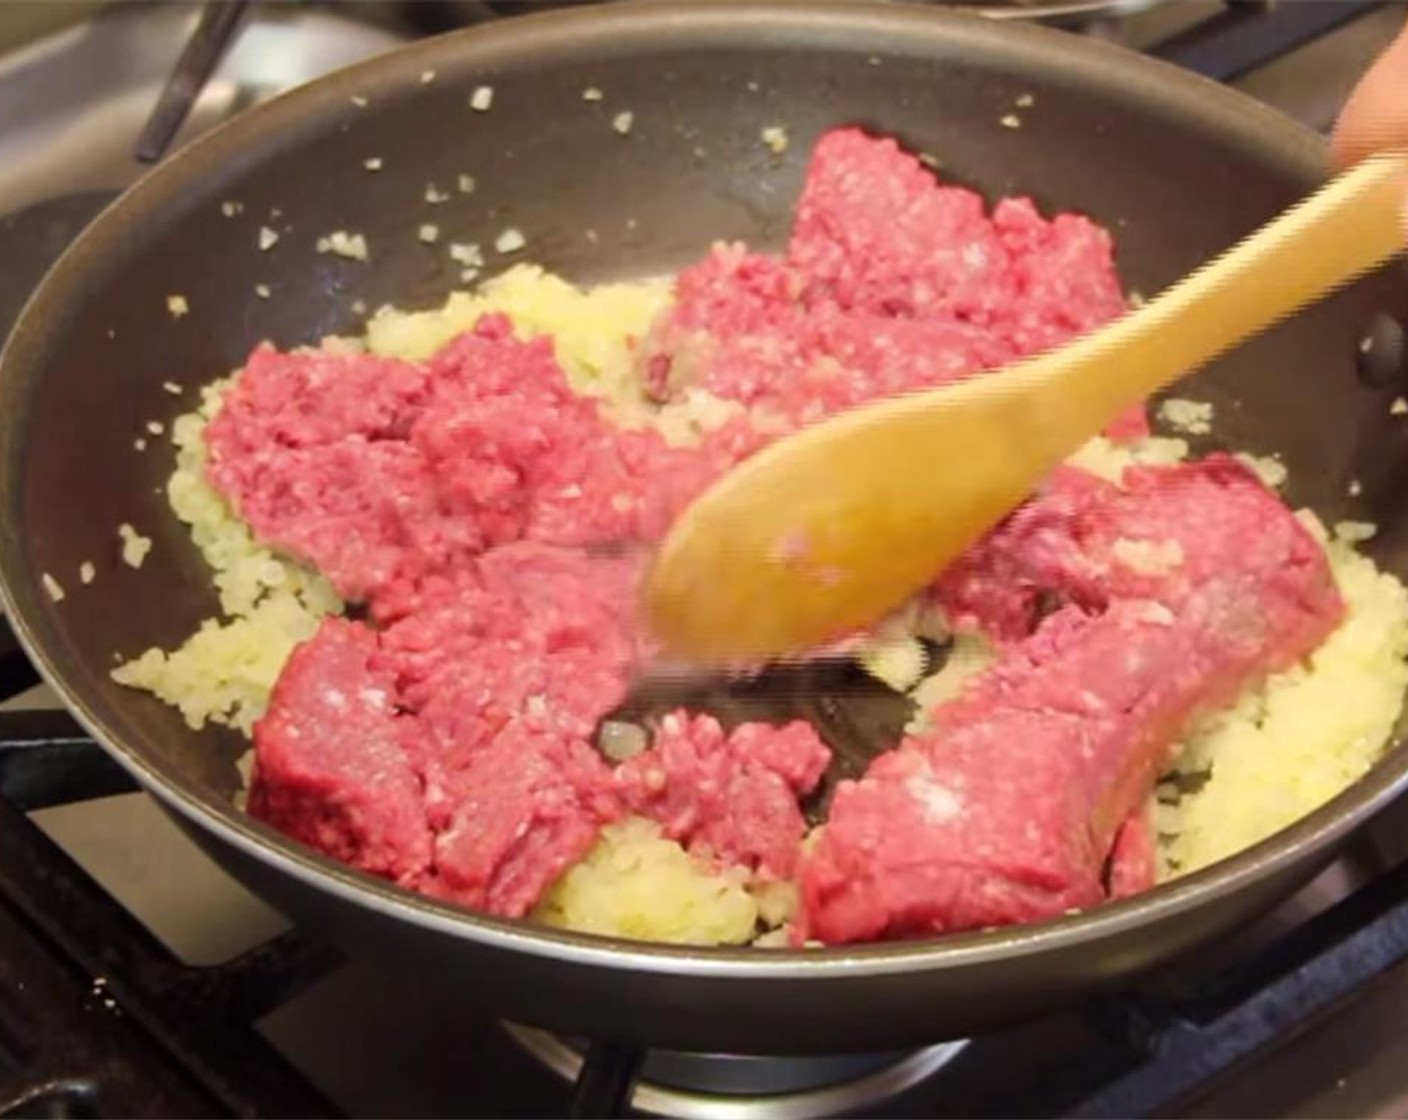 step 3 Add Ground Beef (1.5 lb) and Salt (1/2 Tbsp). Cook over medium heat, breaking up beef and stirring, until completely browned.